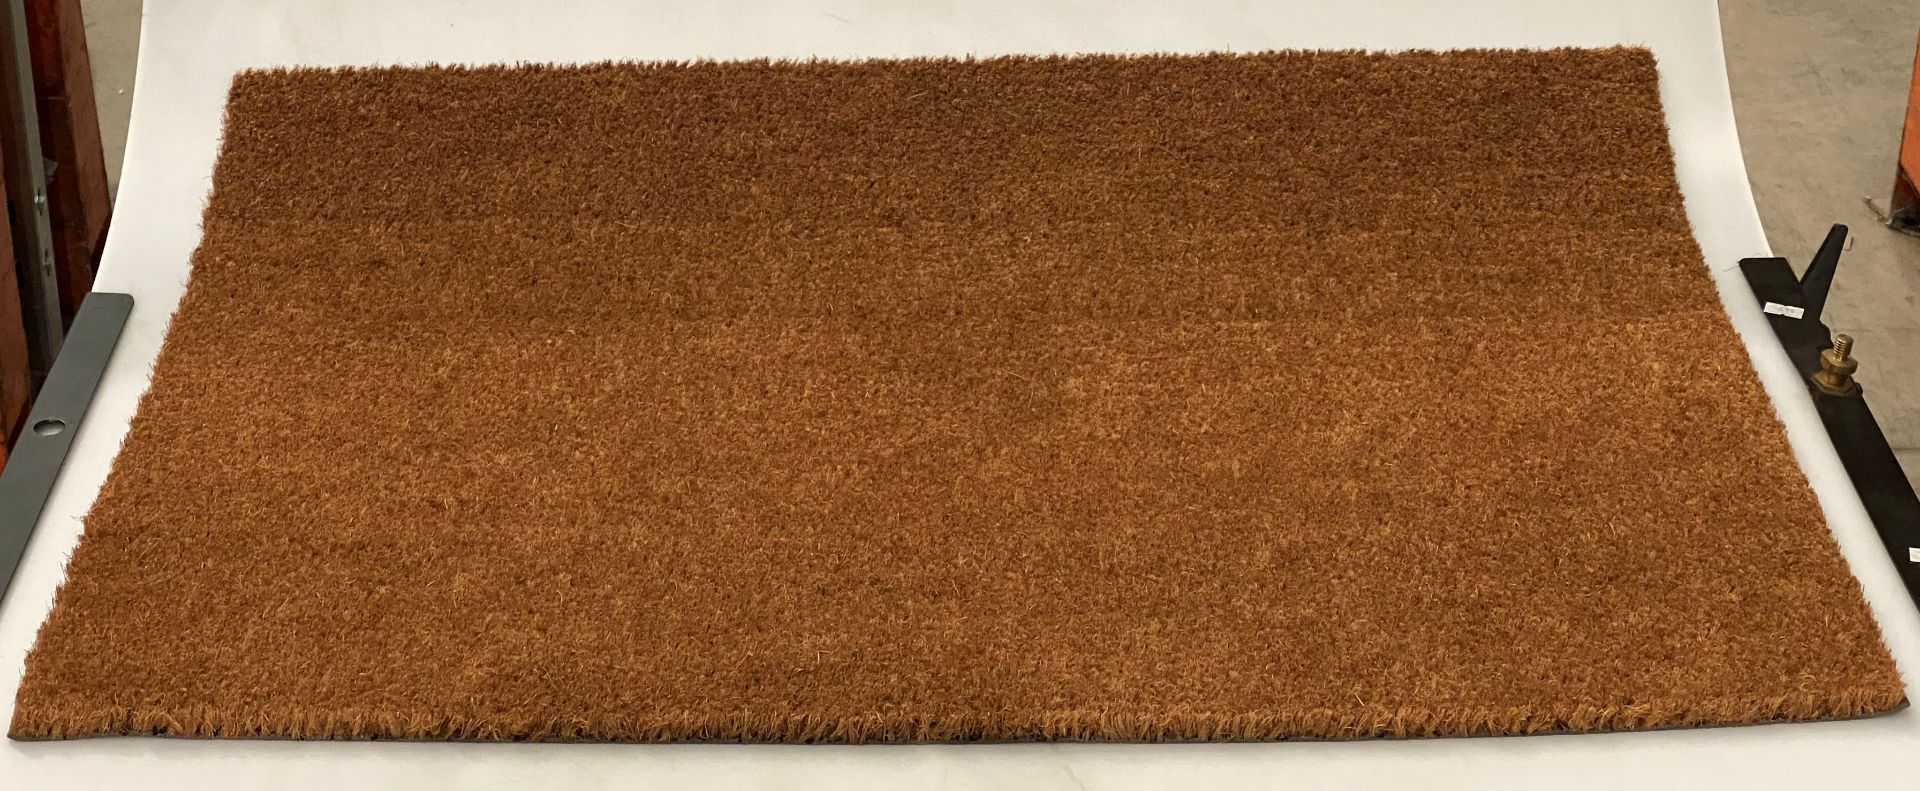 5 x Extra large rubber backed coir doorm